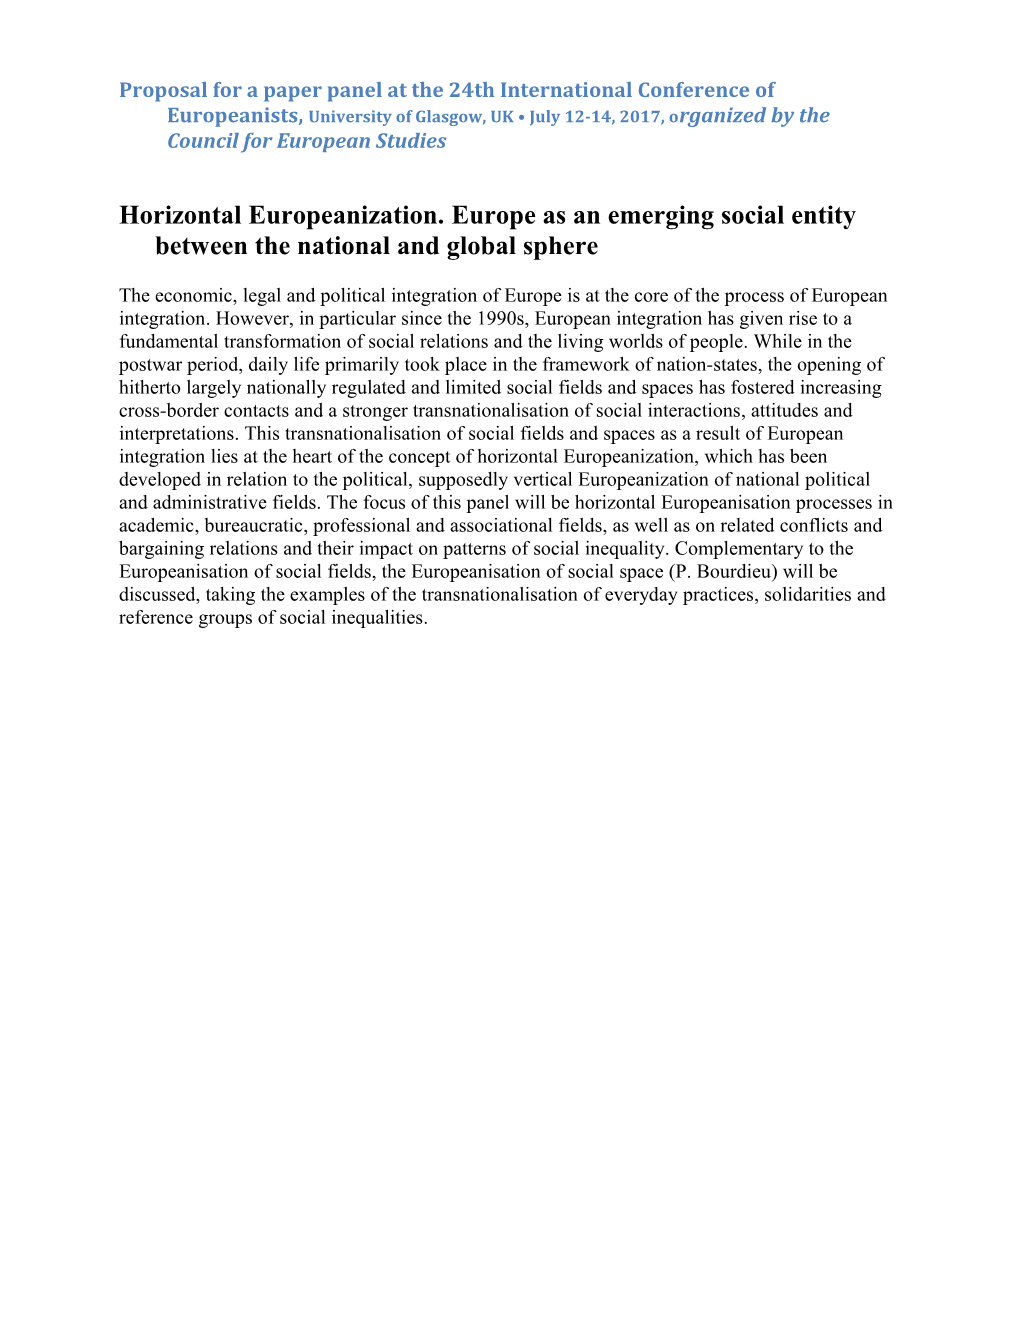 Horizontal Europeanization.Europe As an Emerging Social Entity Between the National And